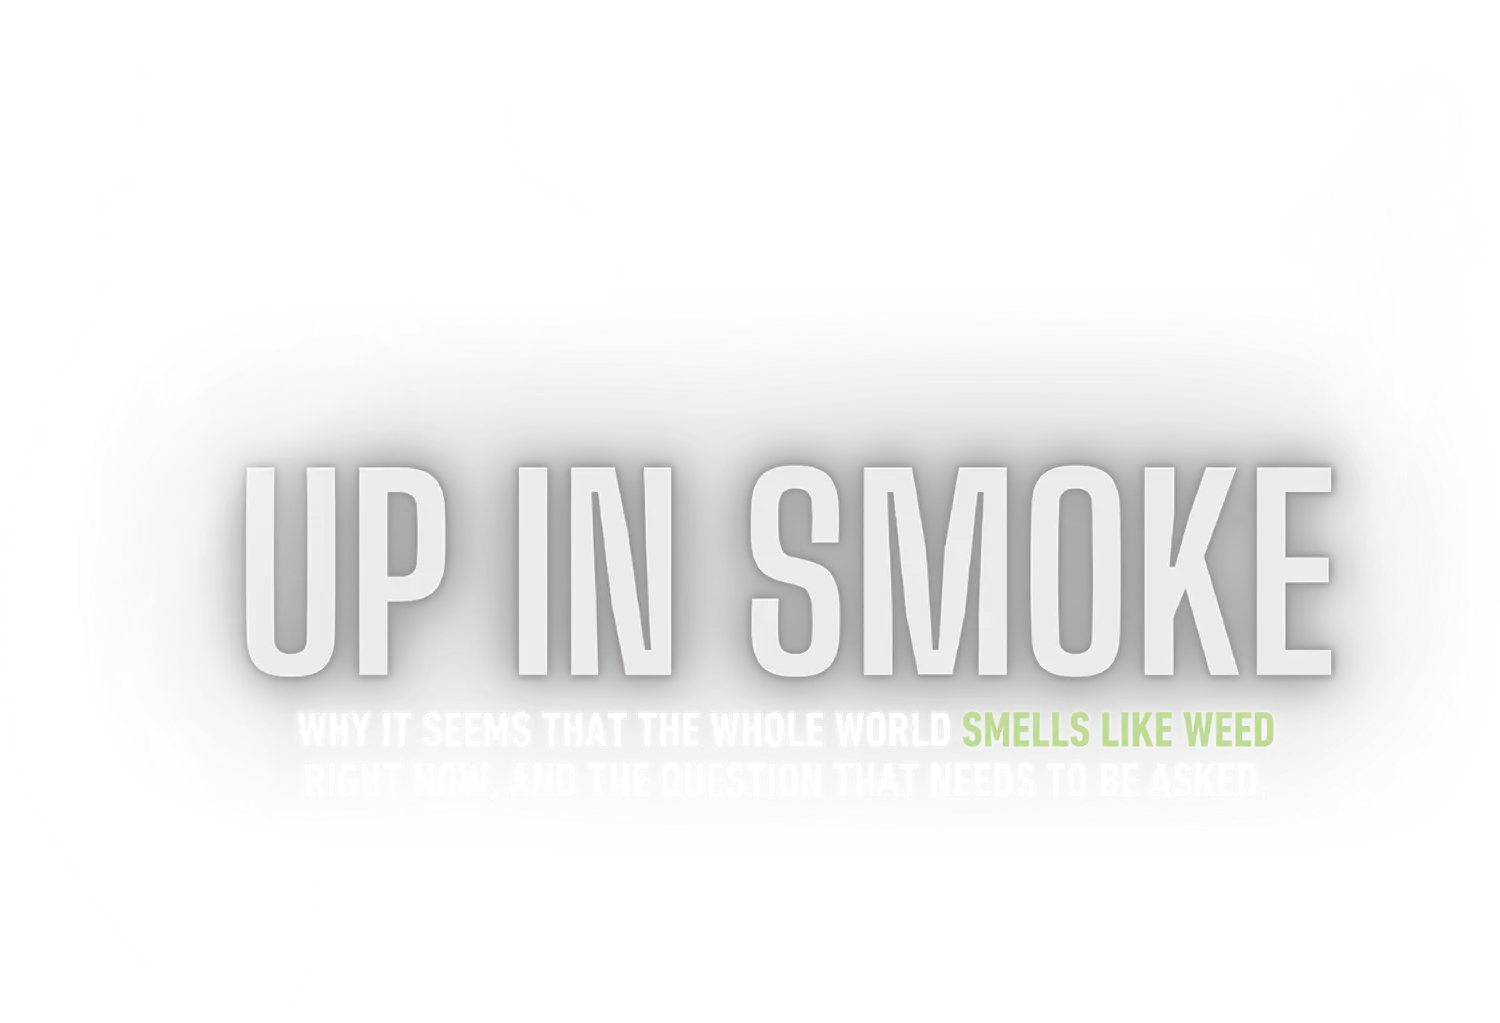 Up in Smoke: Why It Seems that the Whole World Smells like Week Right Now, and the Question that Needs to be Asked.